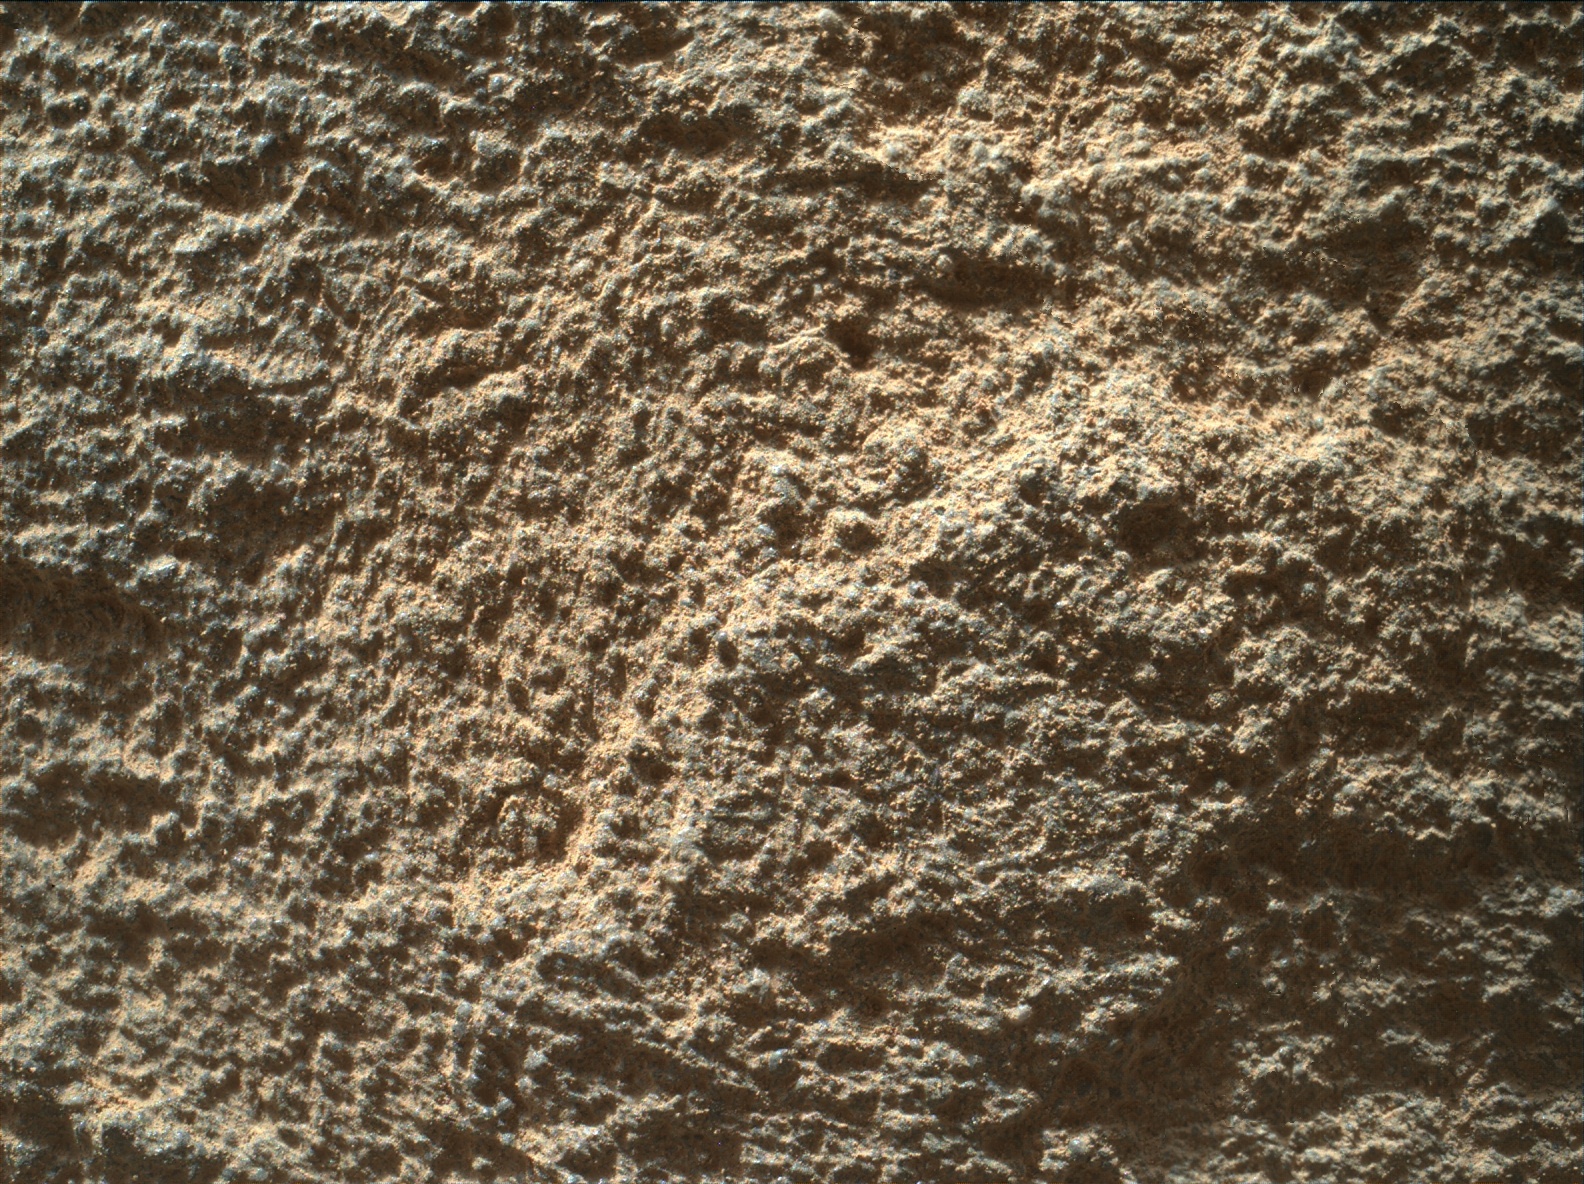 Nasa's Mars rover Curiosity acquired this image using its Mars Hand Lens Imager (MAHLI) on Sol 1295